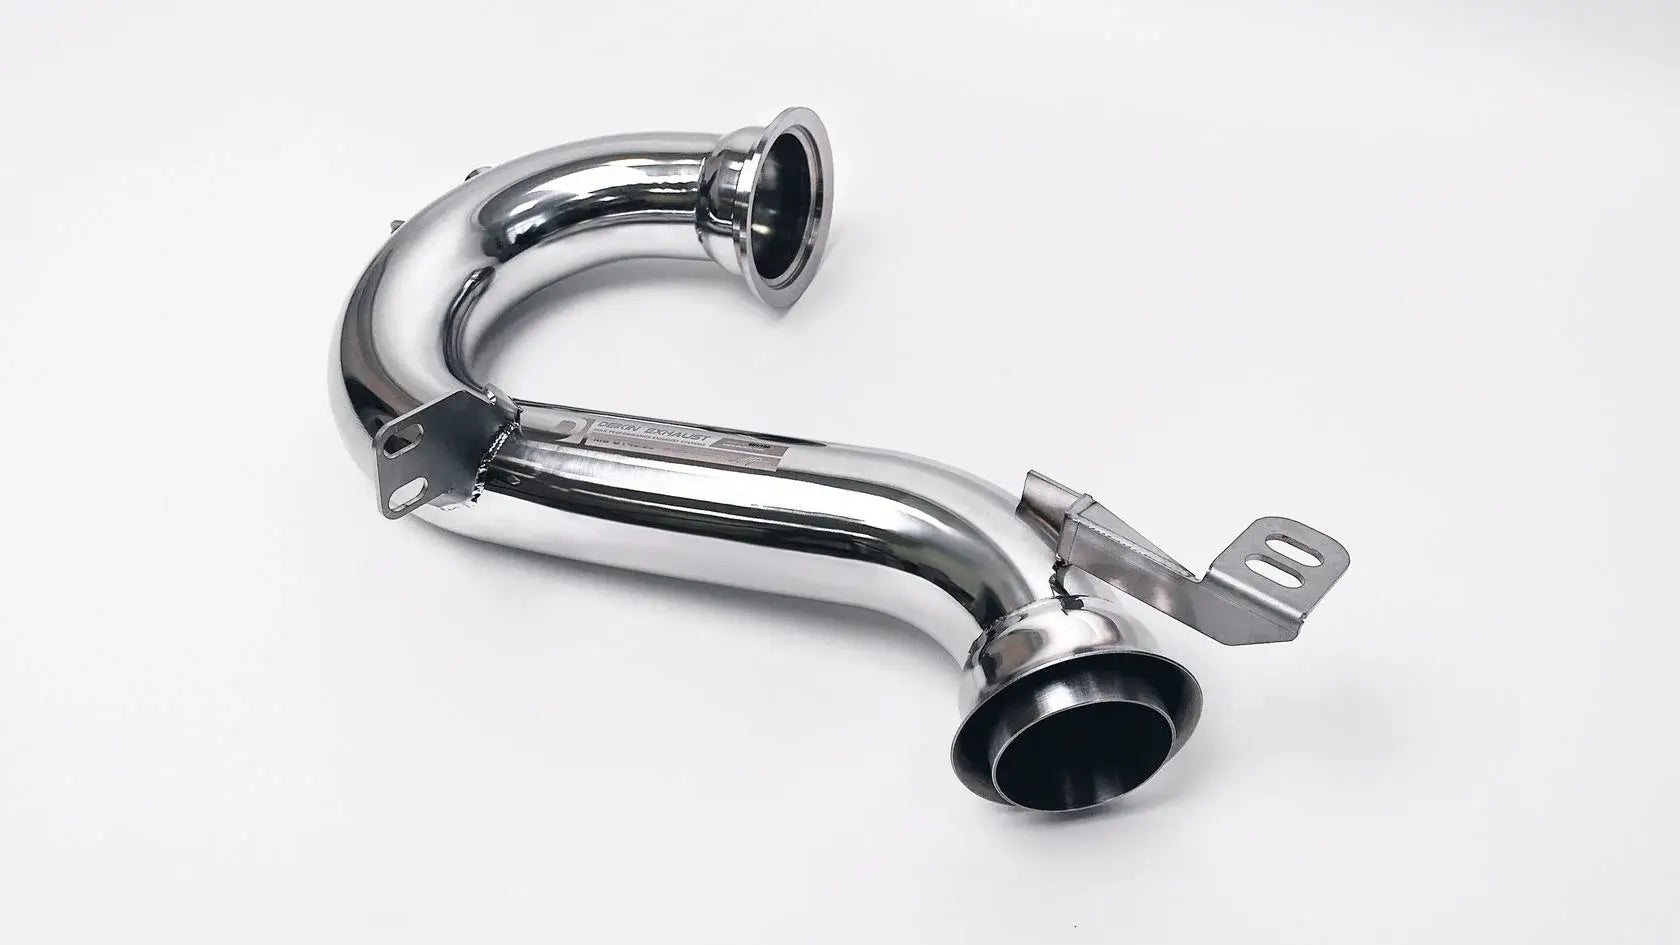 DEIKIN 10-MB.GT43.X290-DP Downpipe for Mercedes-AMG GT43 (x290) without HeatShield Photo-1 